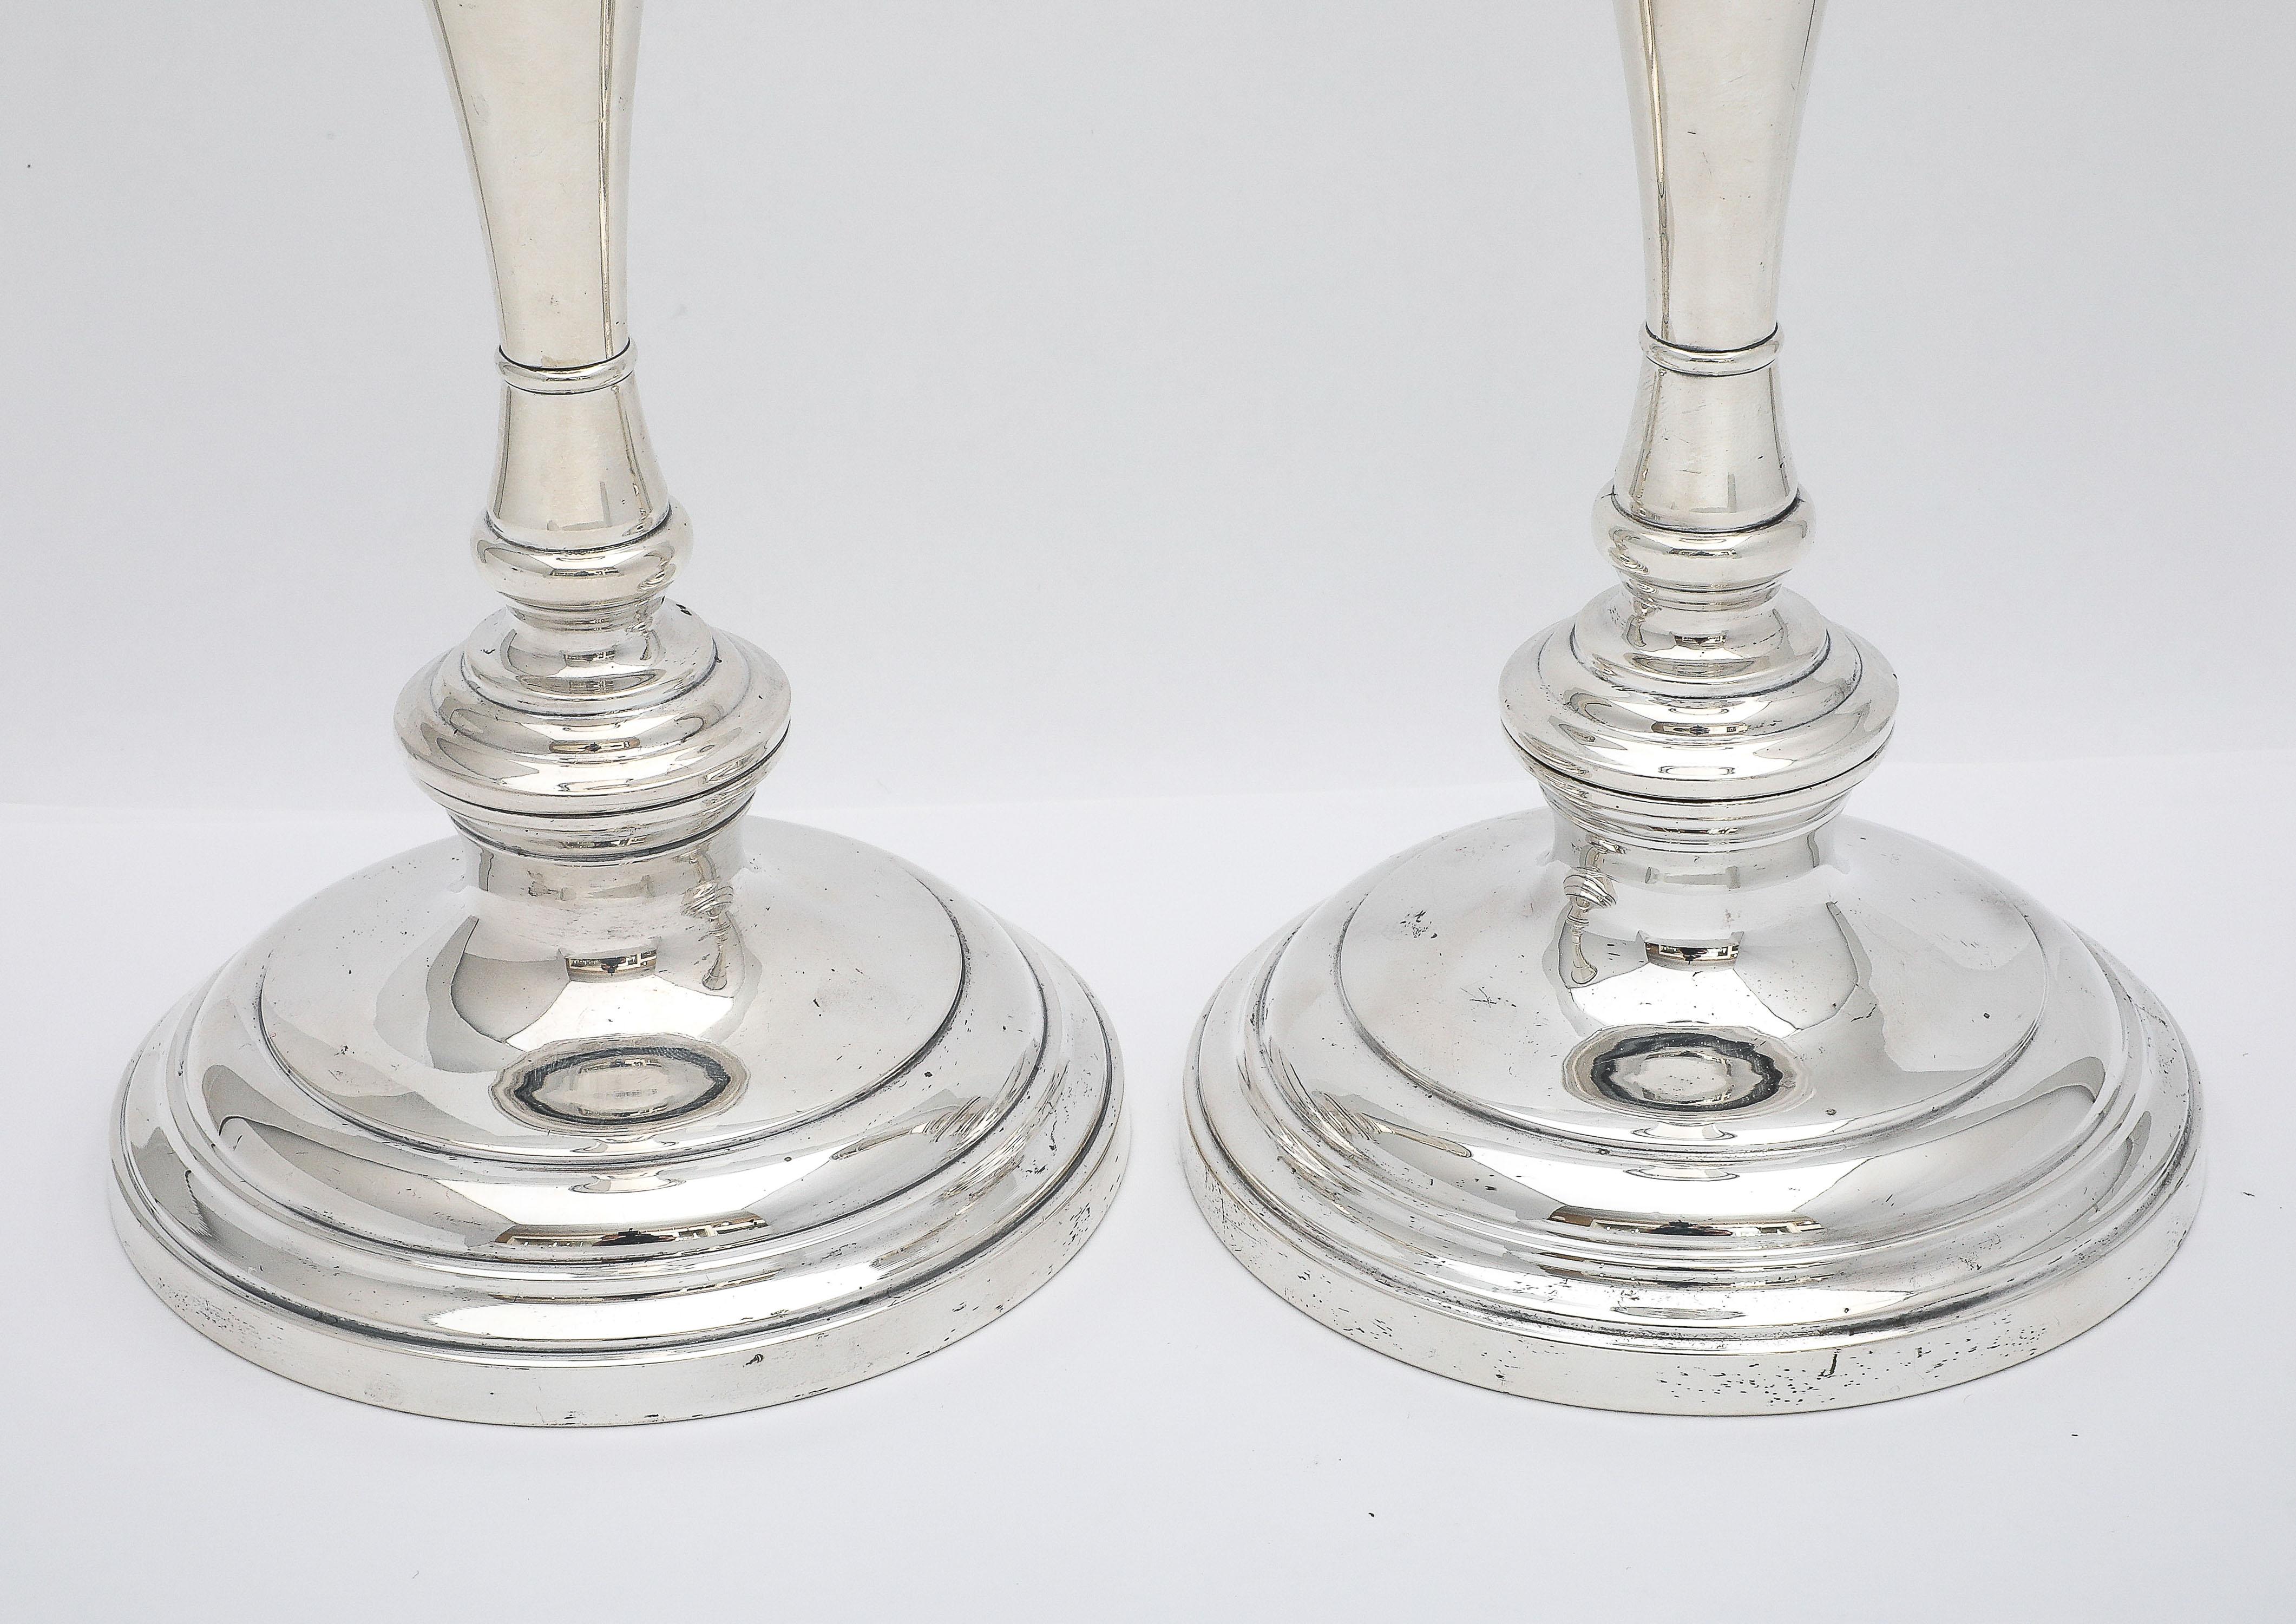  Tall Pair of Sterling Silver George III-Style Candlesticks - S. Kirk and Son For Sale 8